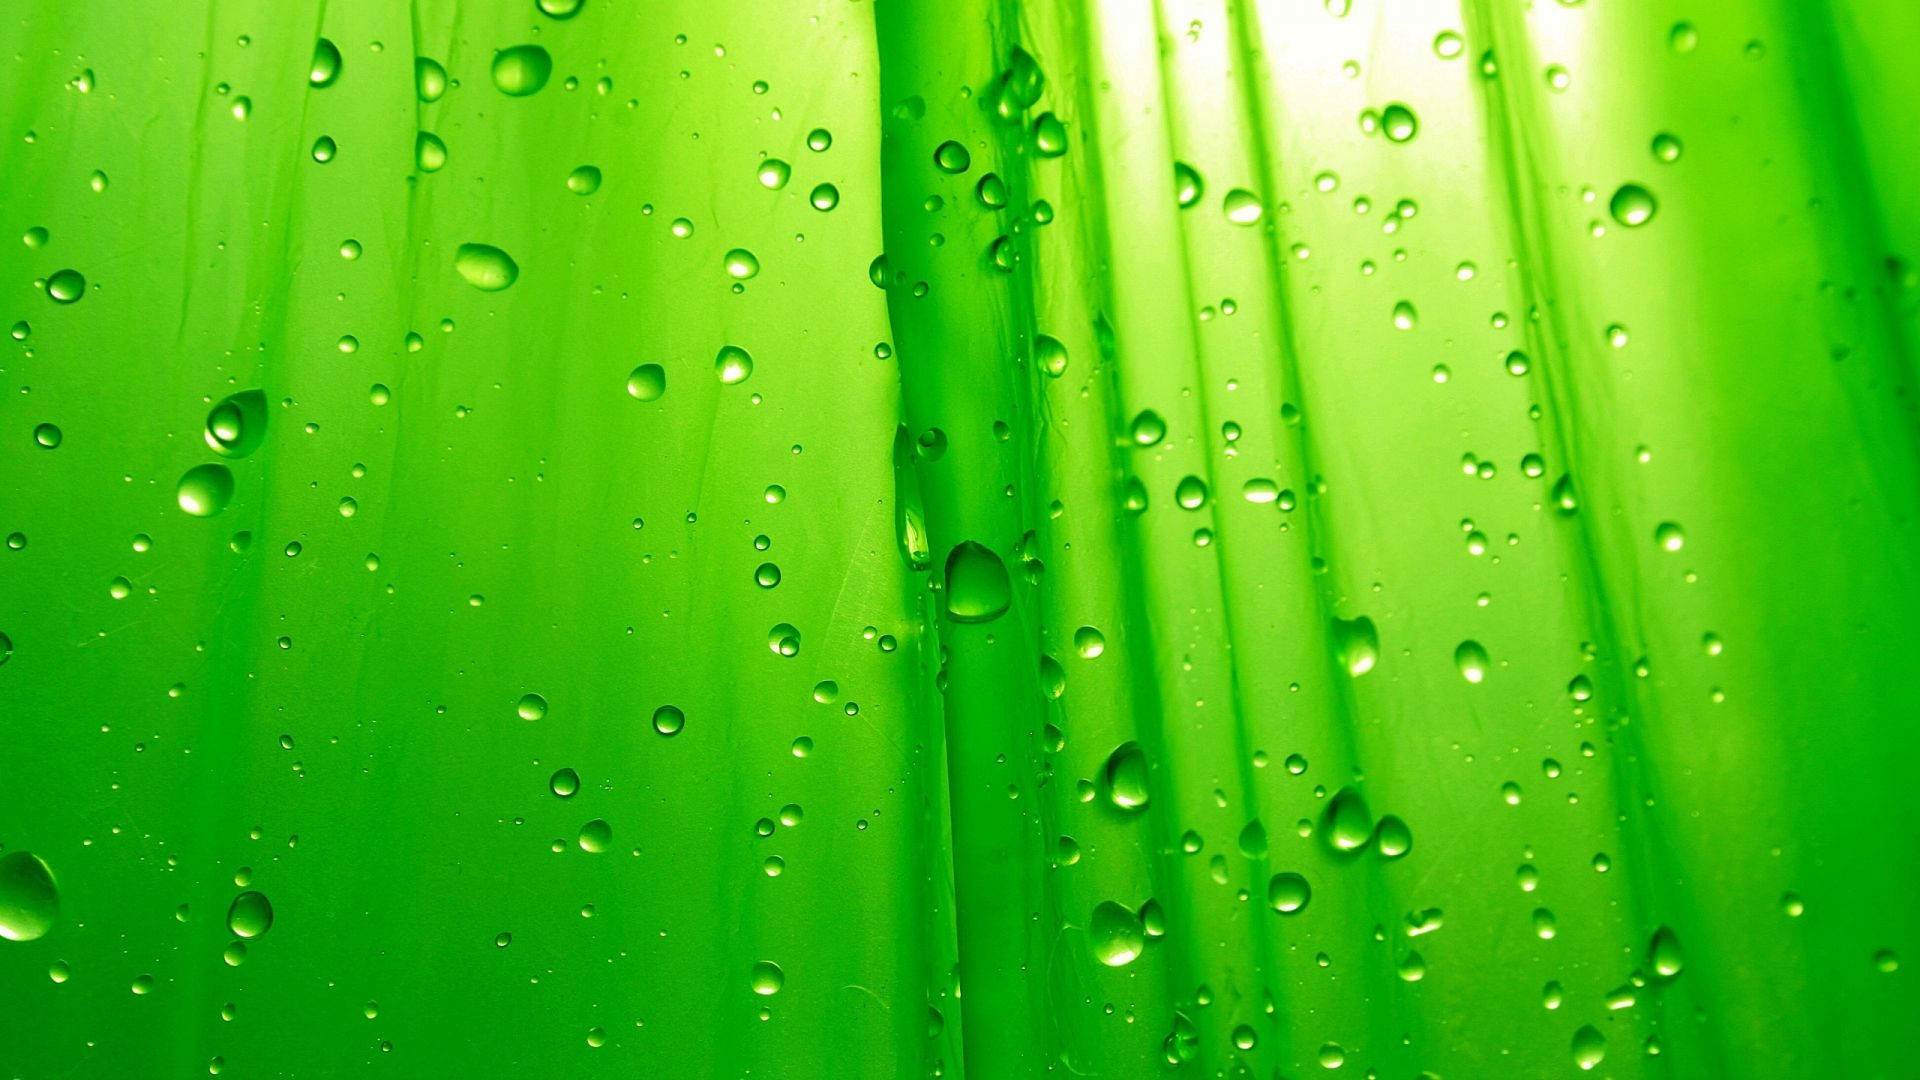 Download Green Backgrounds 3202 1920x1080 px High Resolution ...